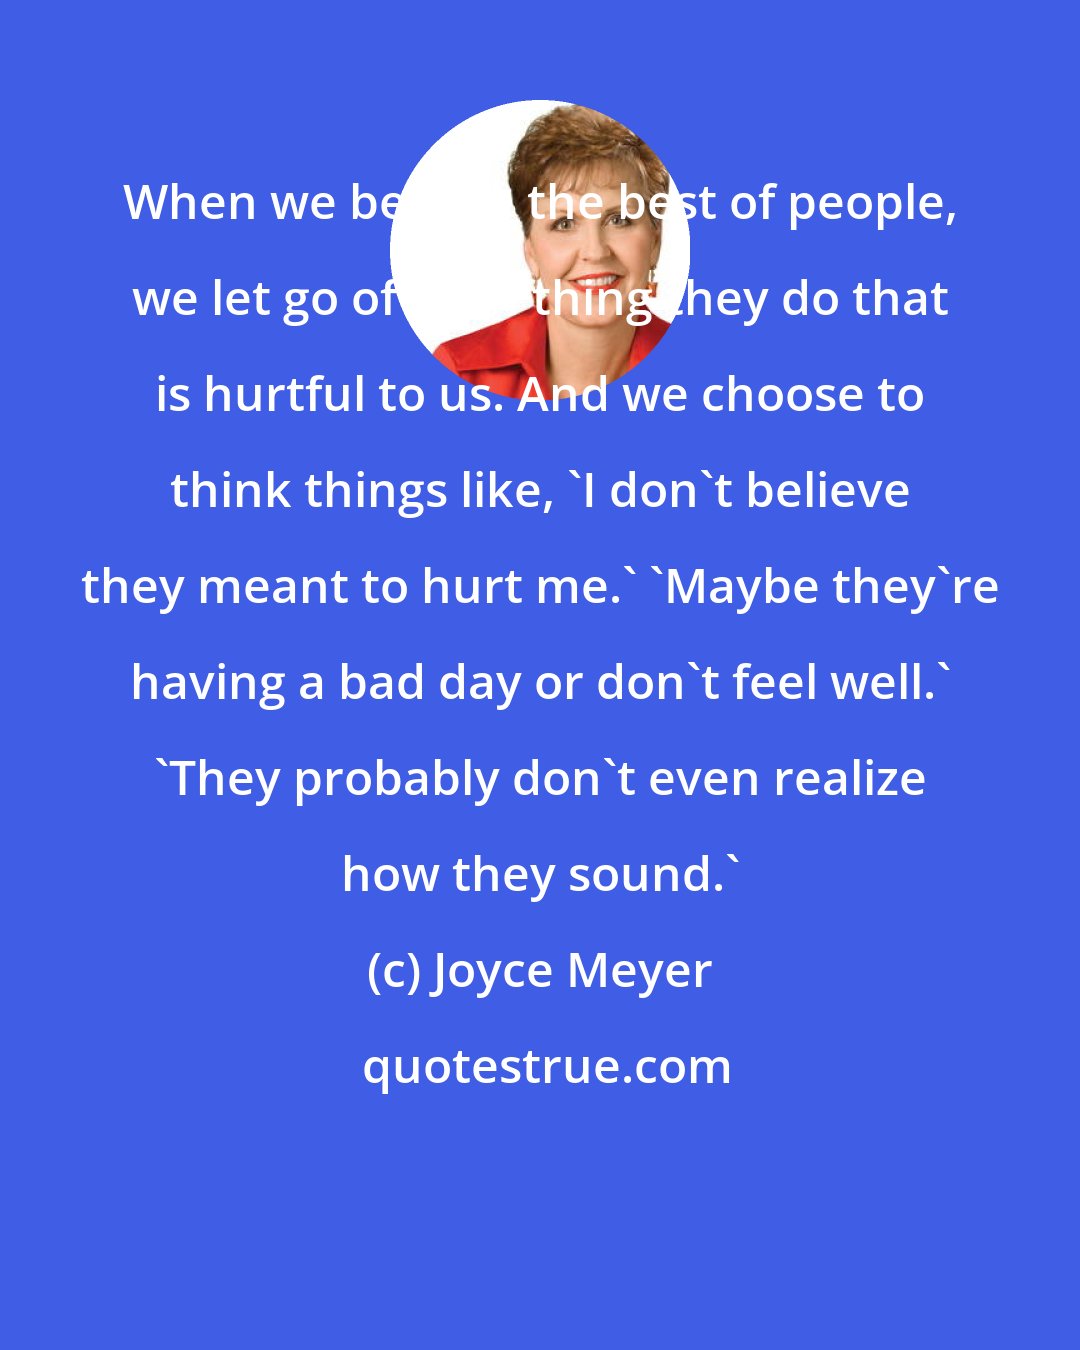 Joyce Meyer: When we believe the best of people, we let go of each thing they do that is hurtful to us. And we choose to think things like, 'I don't believe they meant to hurt me.' 'Maybe they're having a bad day or don't feel well.' 'They probably don't even realize how they sound.'